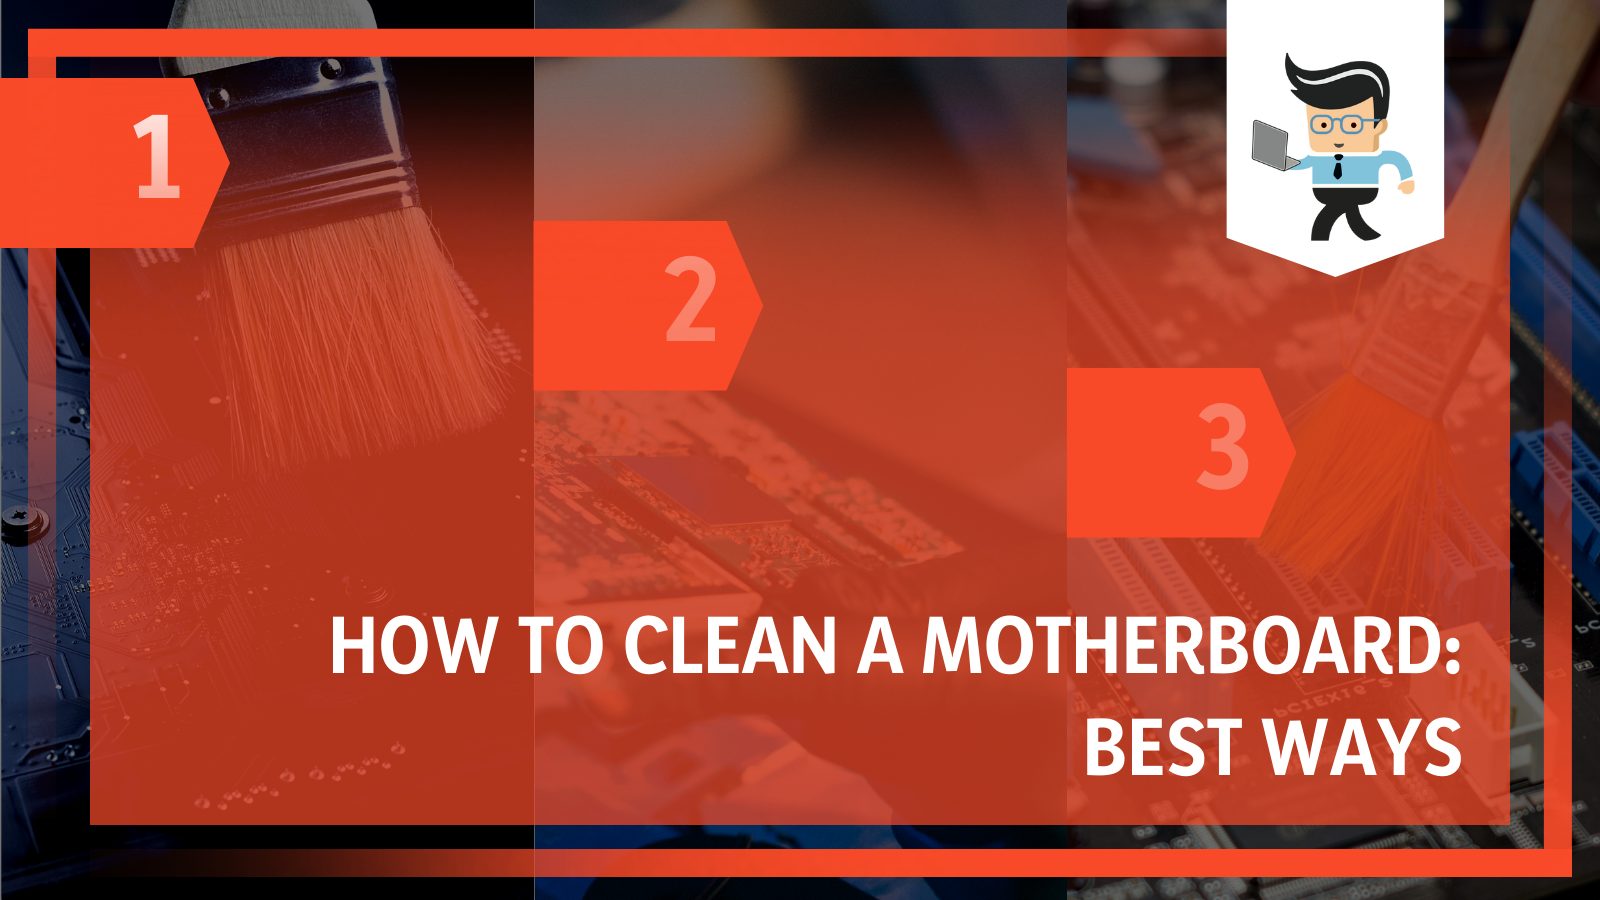 How To Clean A Motherboard